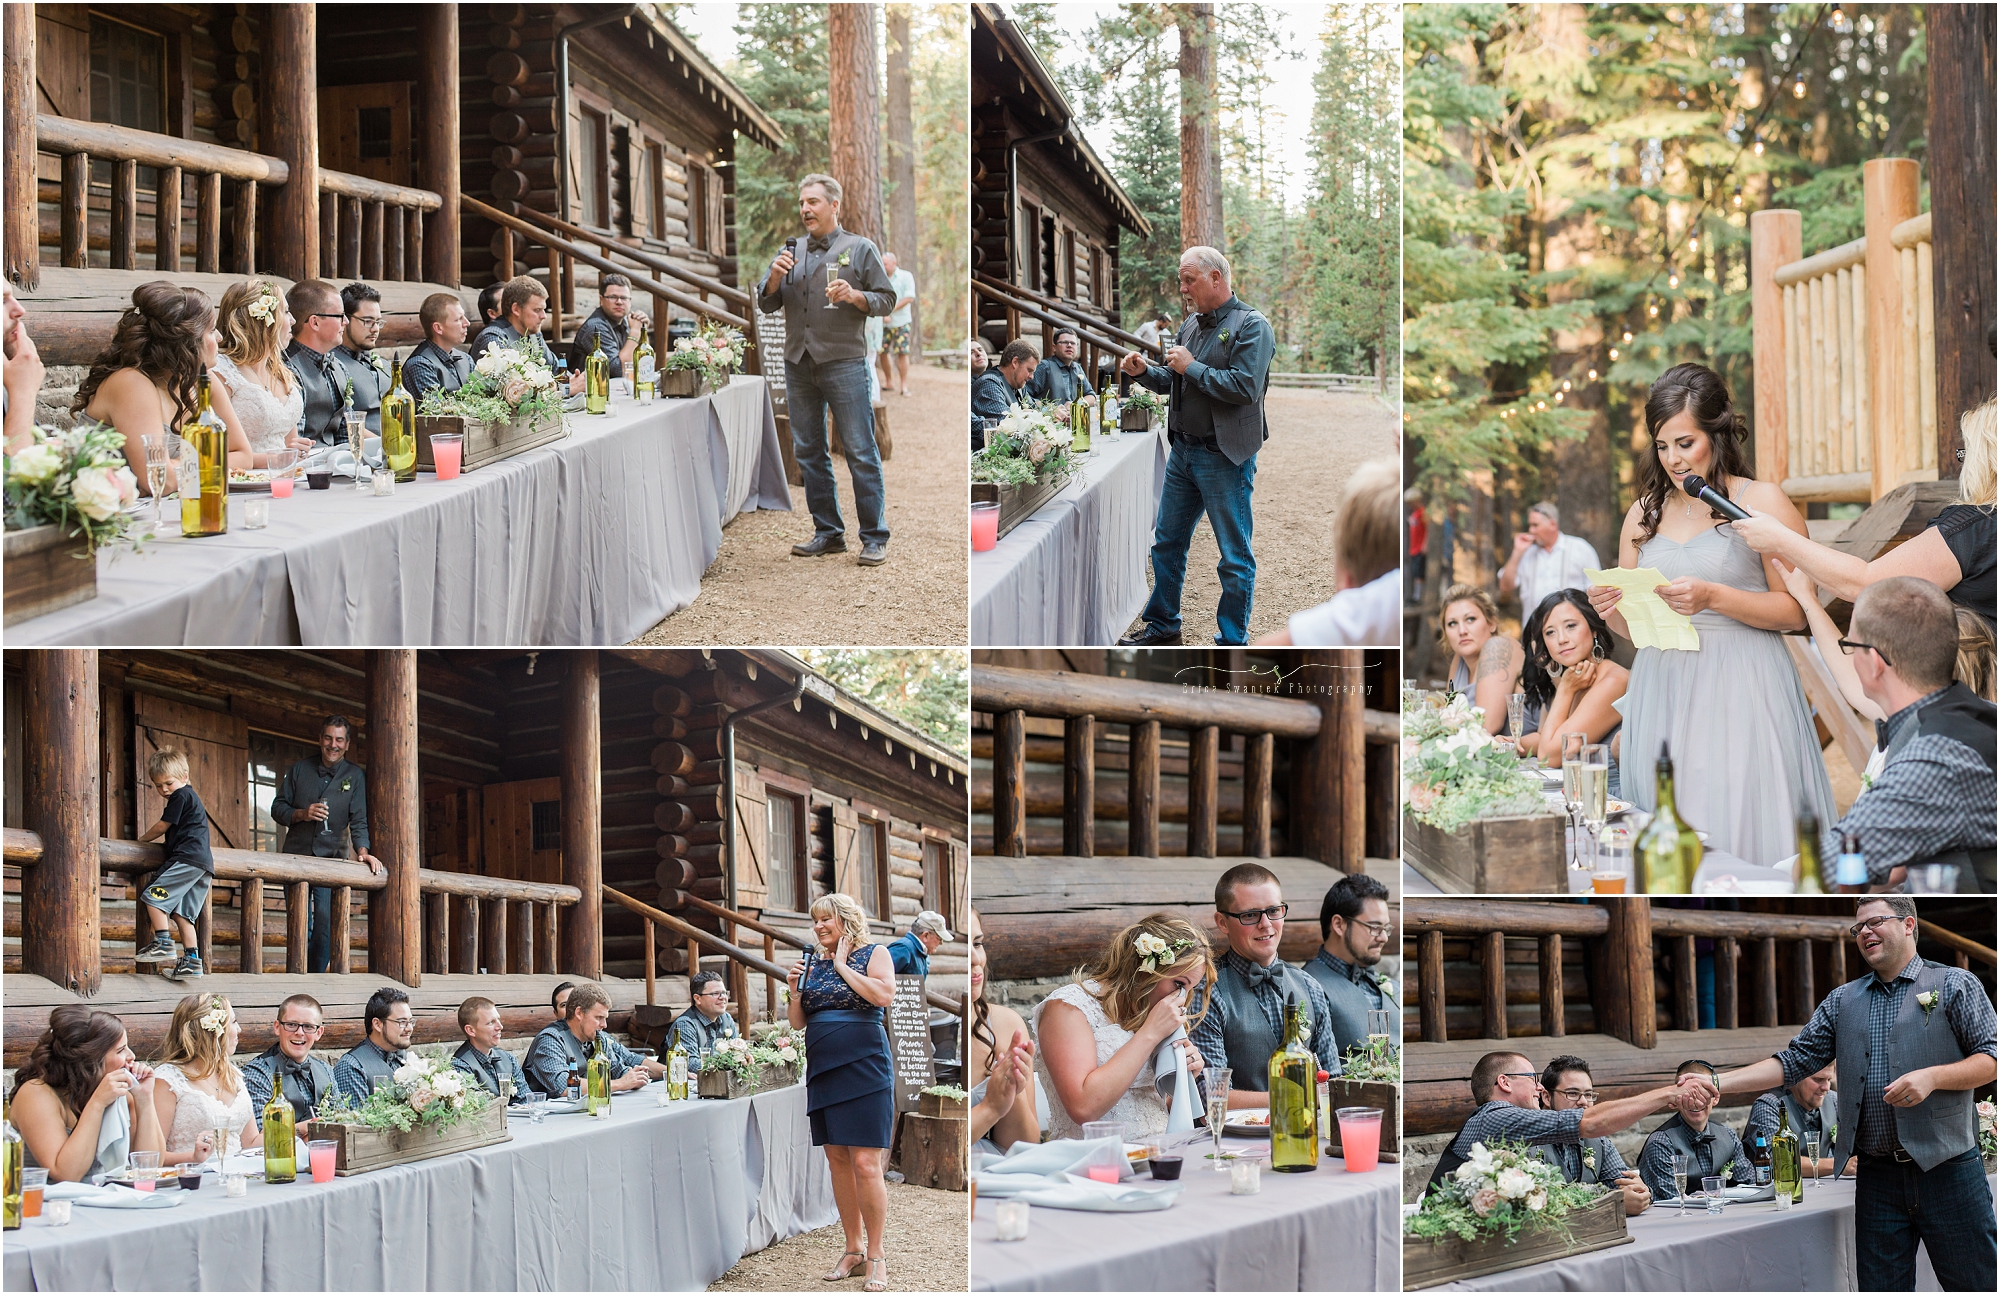 An outdoor wedding reception at this gorgeous rustic Oregon lodge wedding in Bend, OR. 